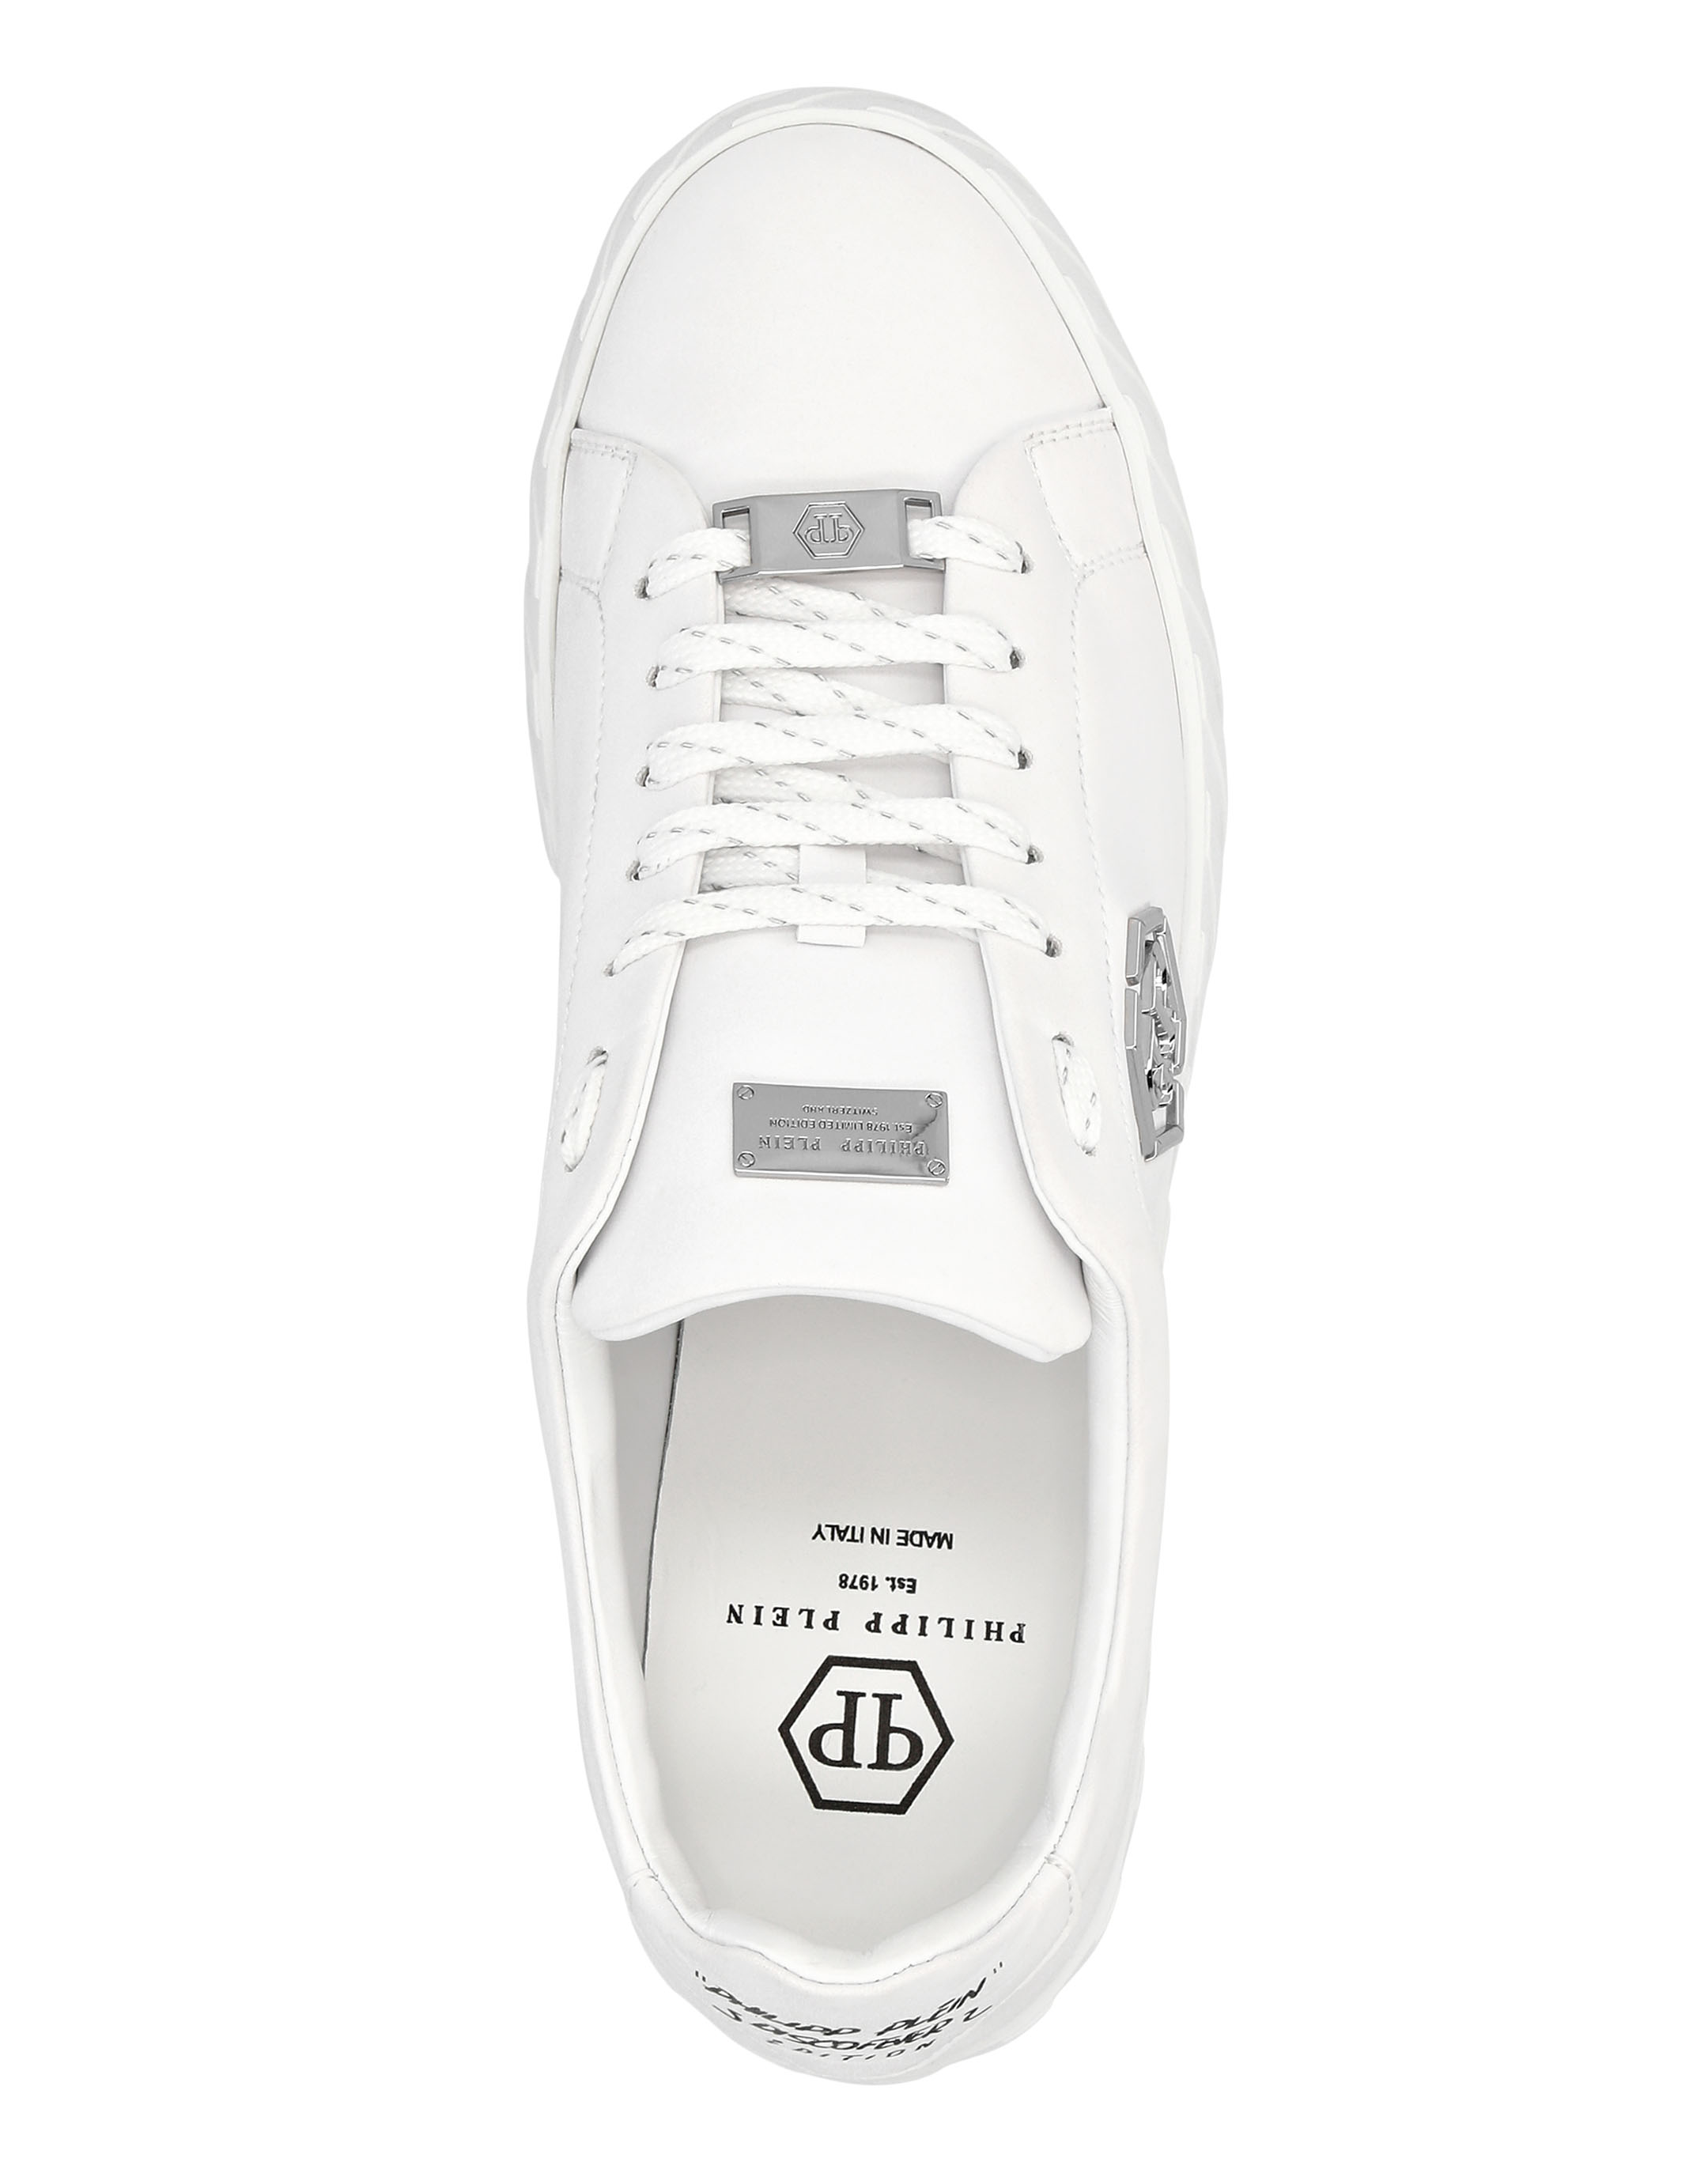 philipp plein shoes limited edition